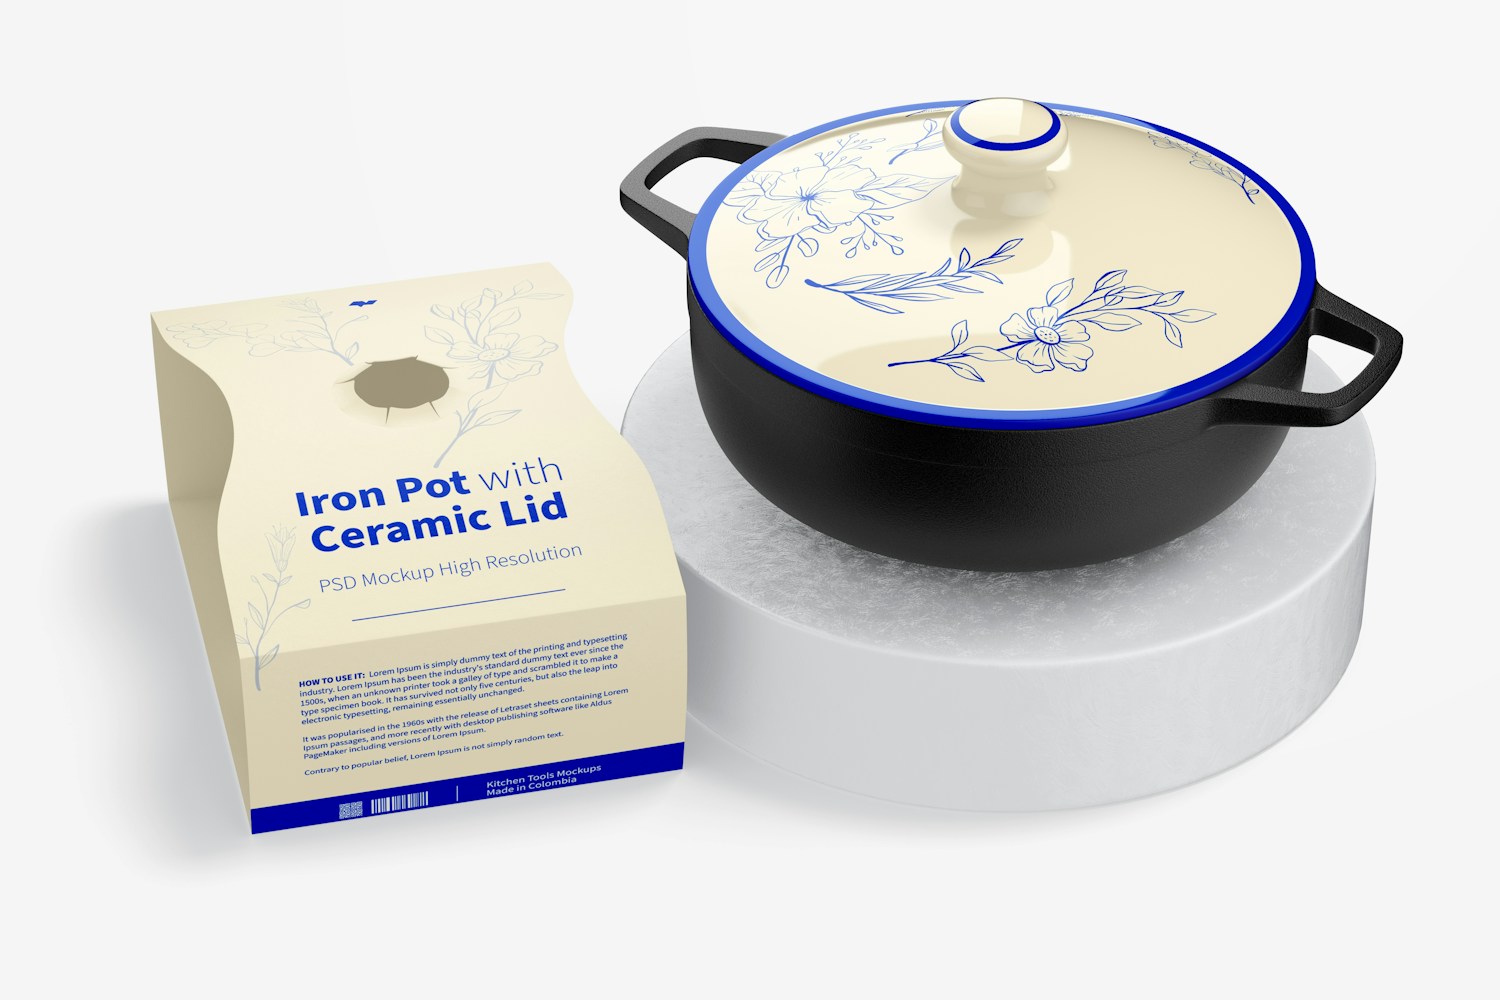 Iron Pot with Ceramic Lid Mockup, Perspective View